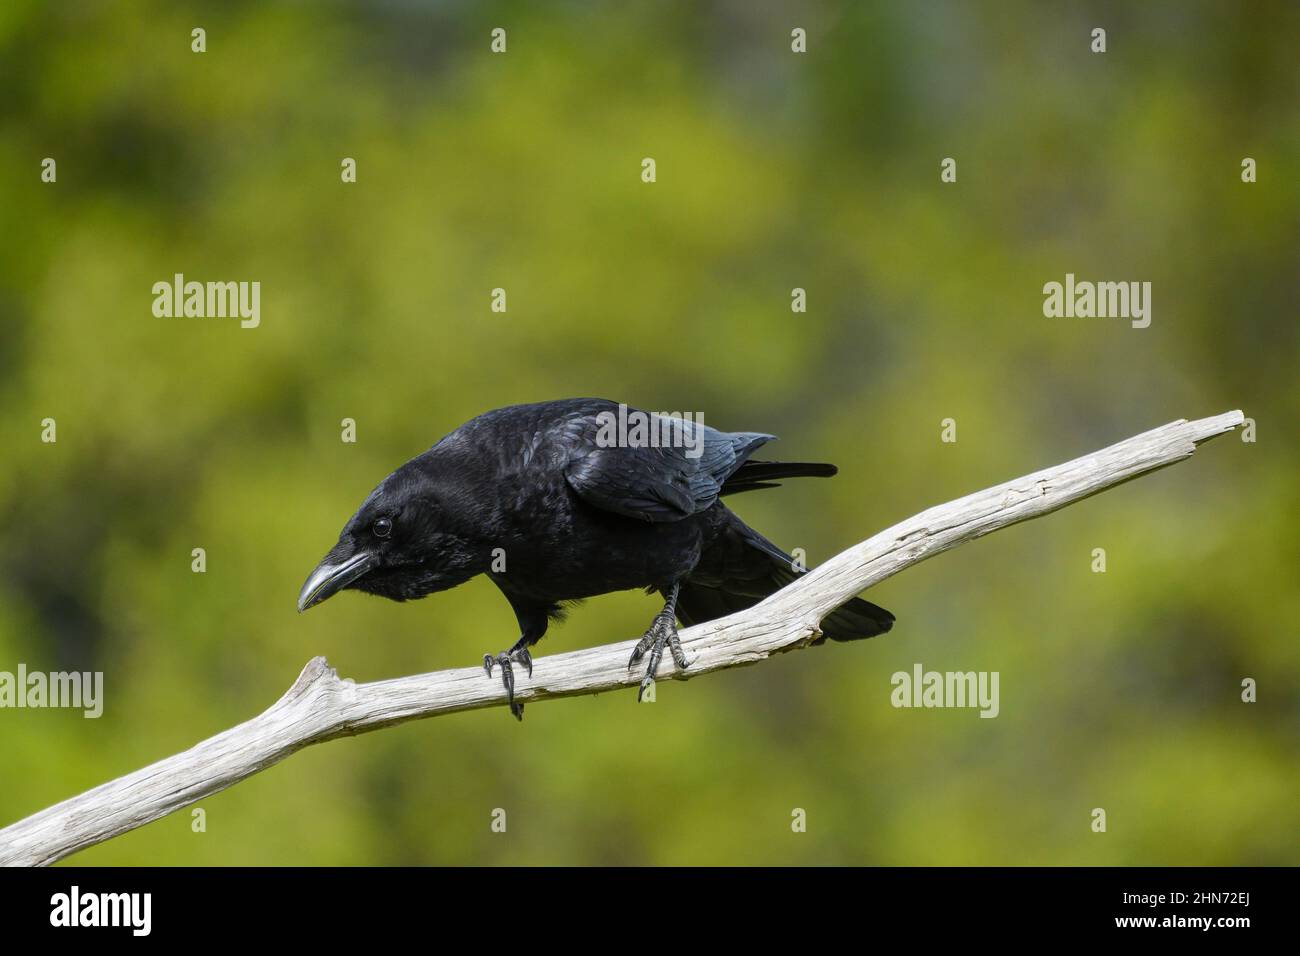 Close-up of a Carrion crow perched on a branch Stock Photo